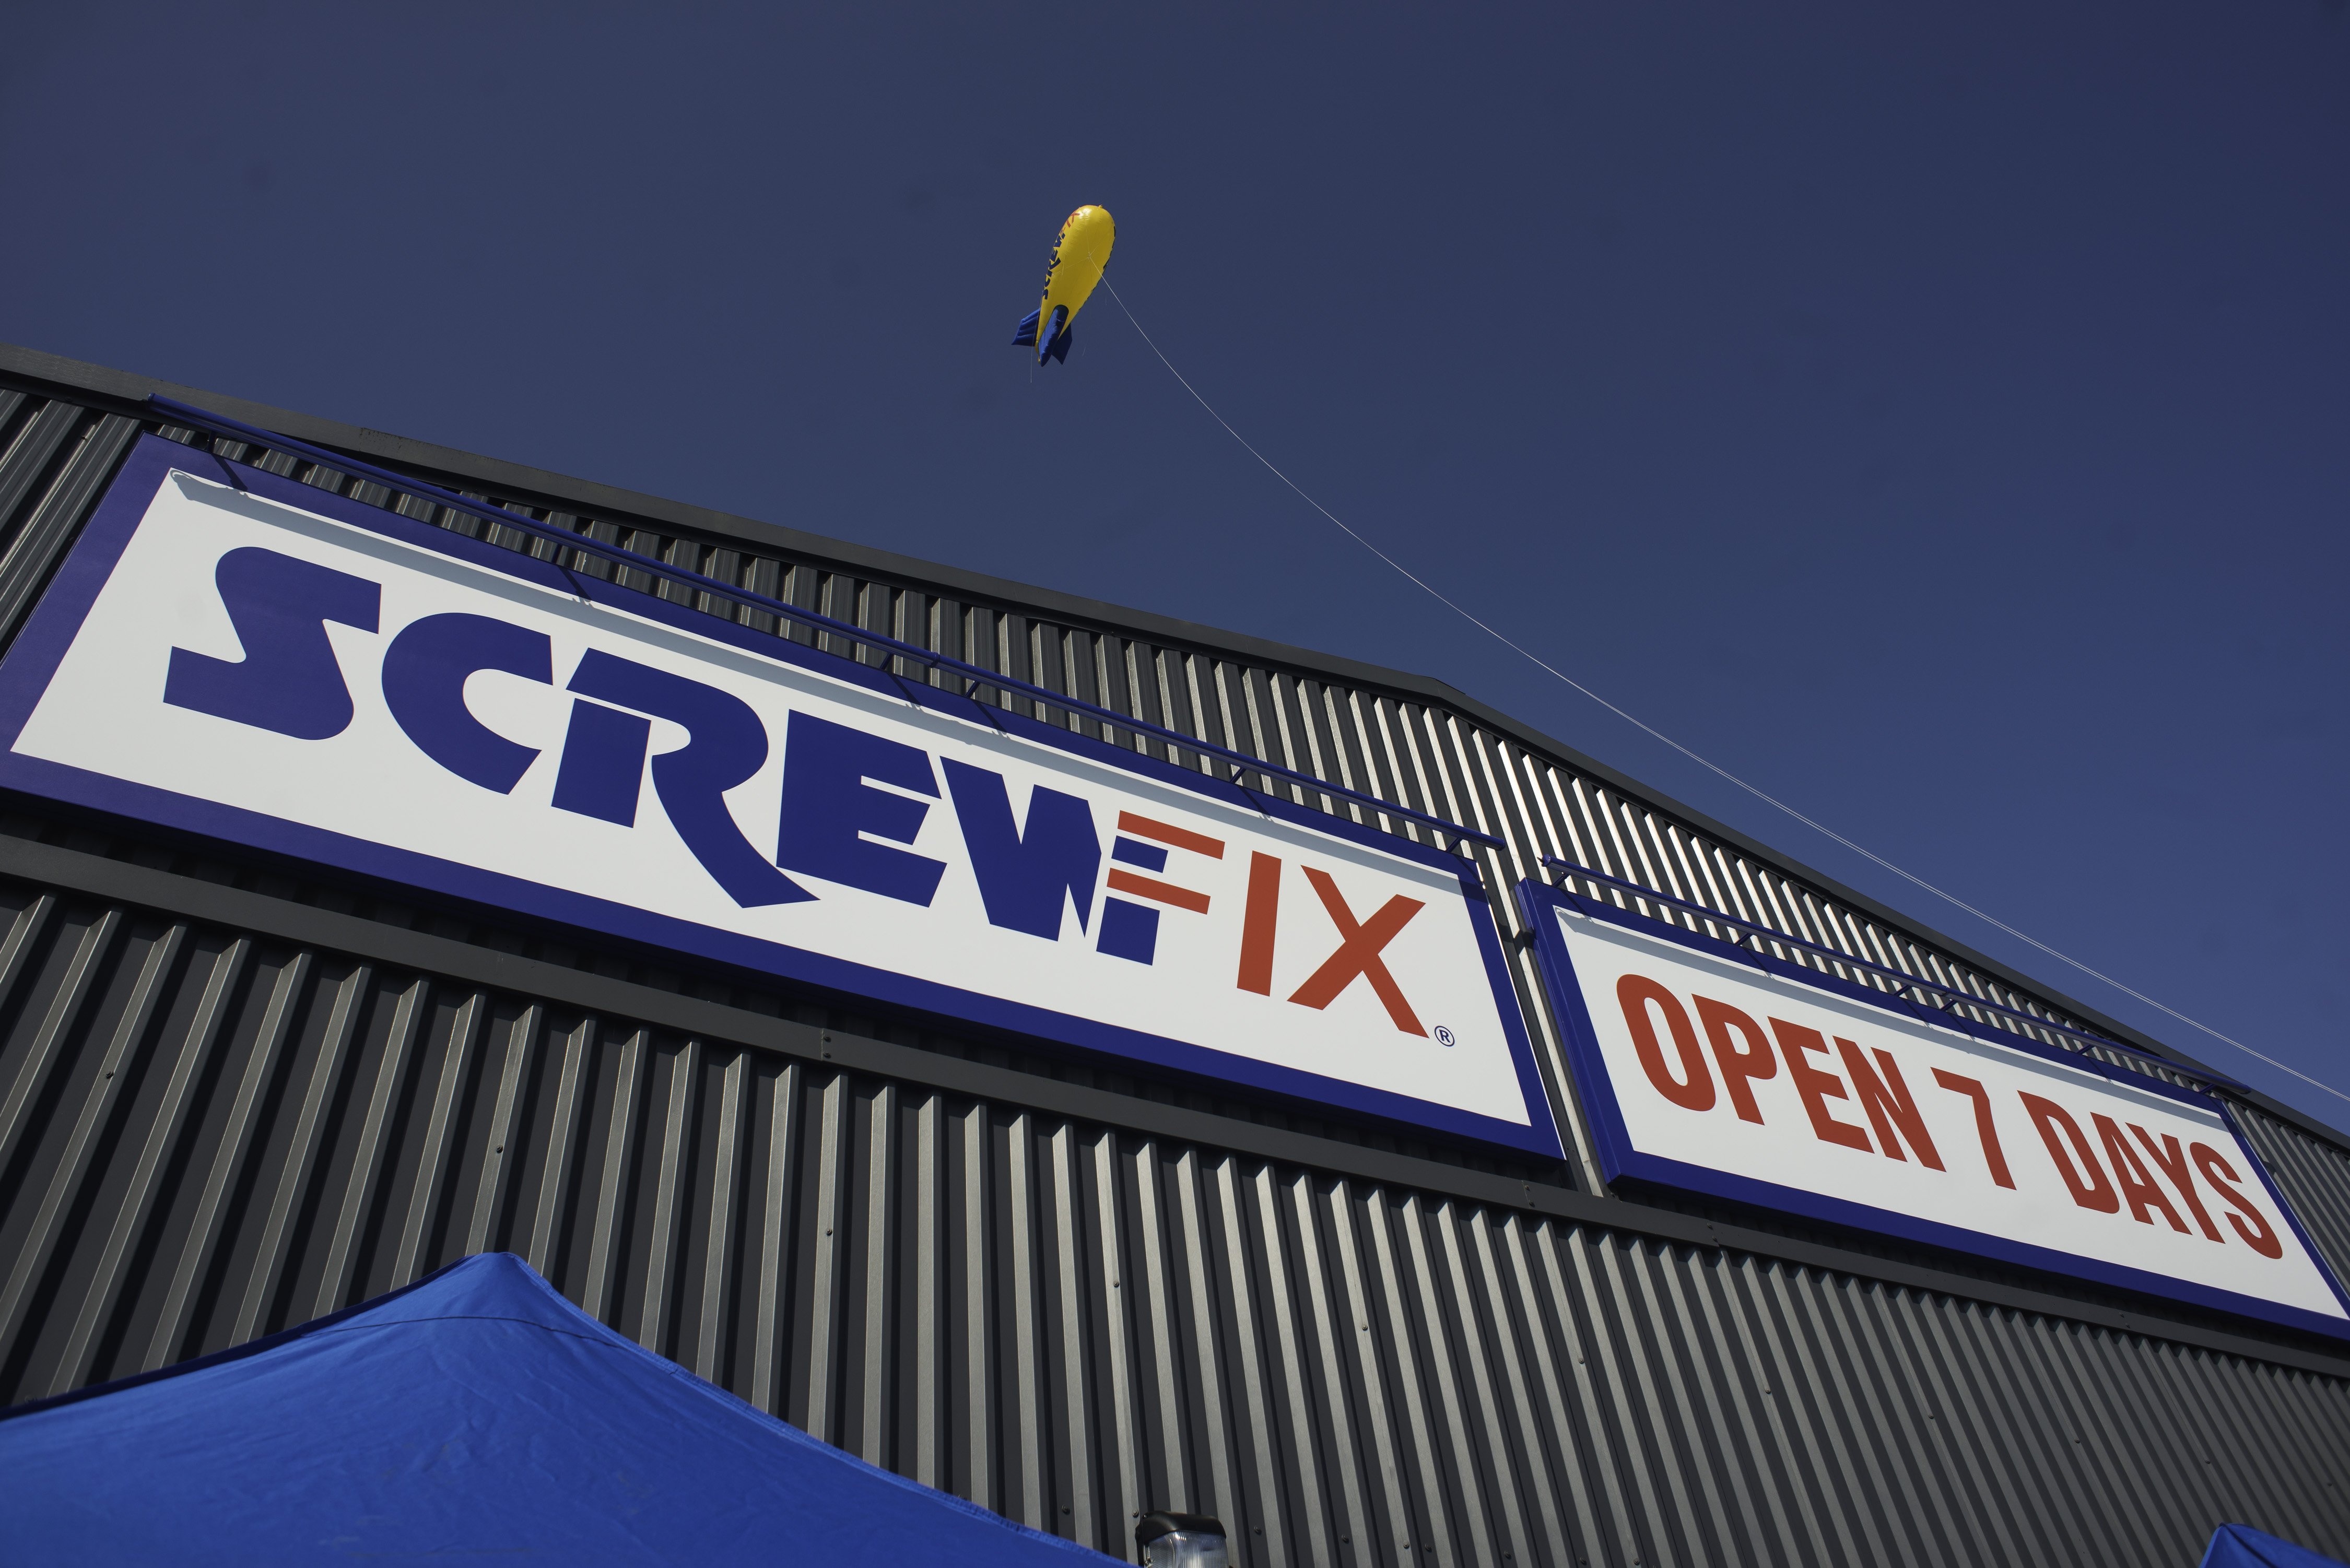 Deeside’s first Screwfix store to open on 22nd October